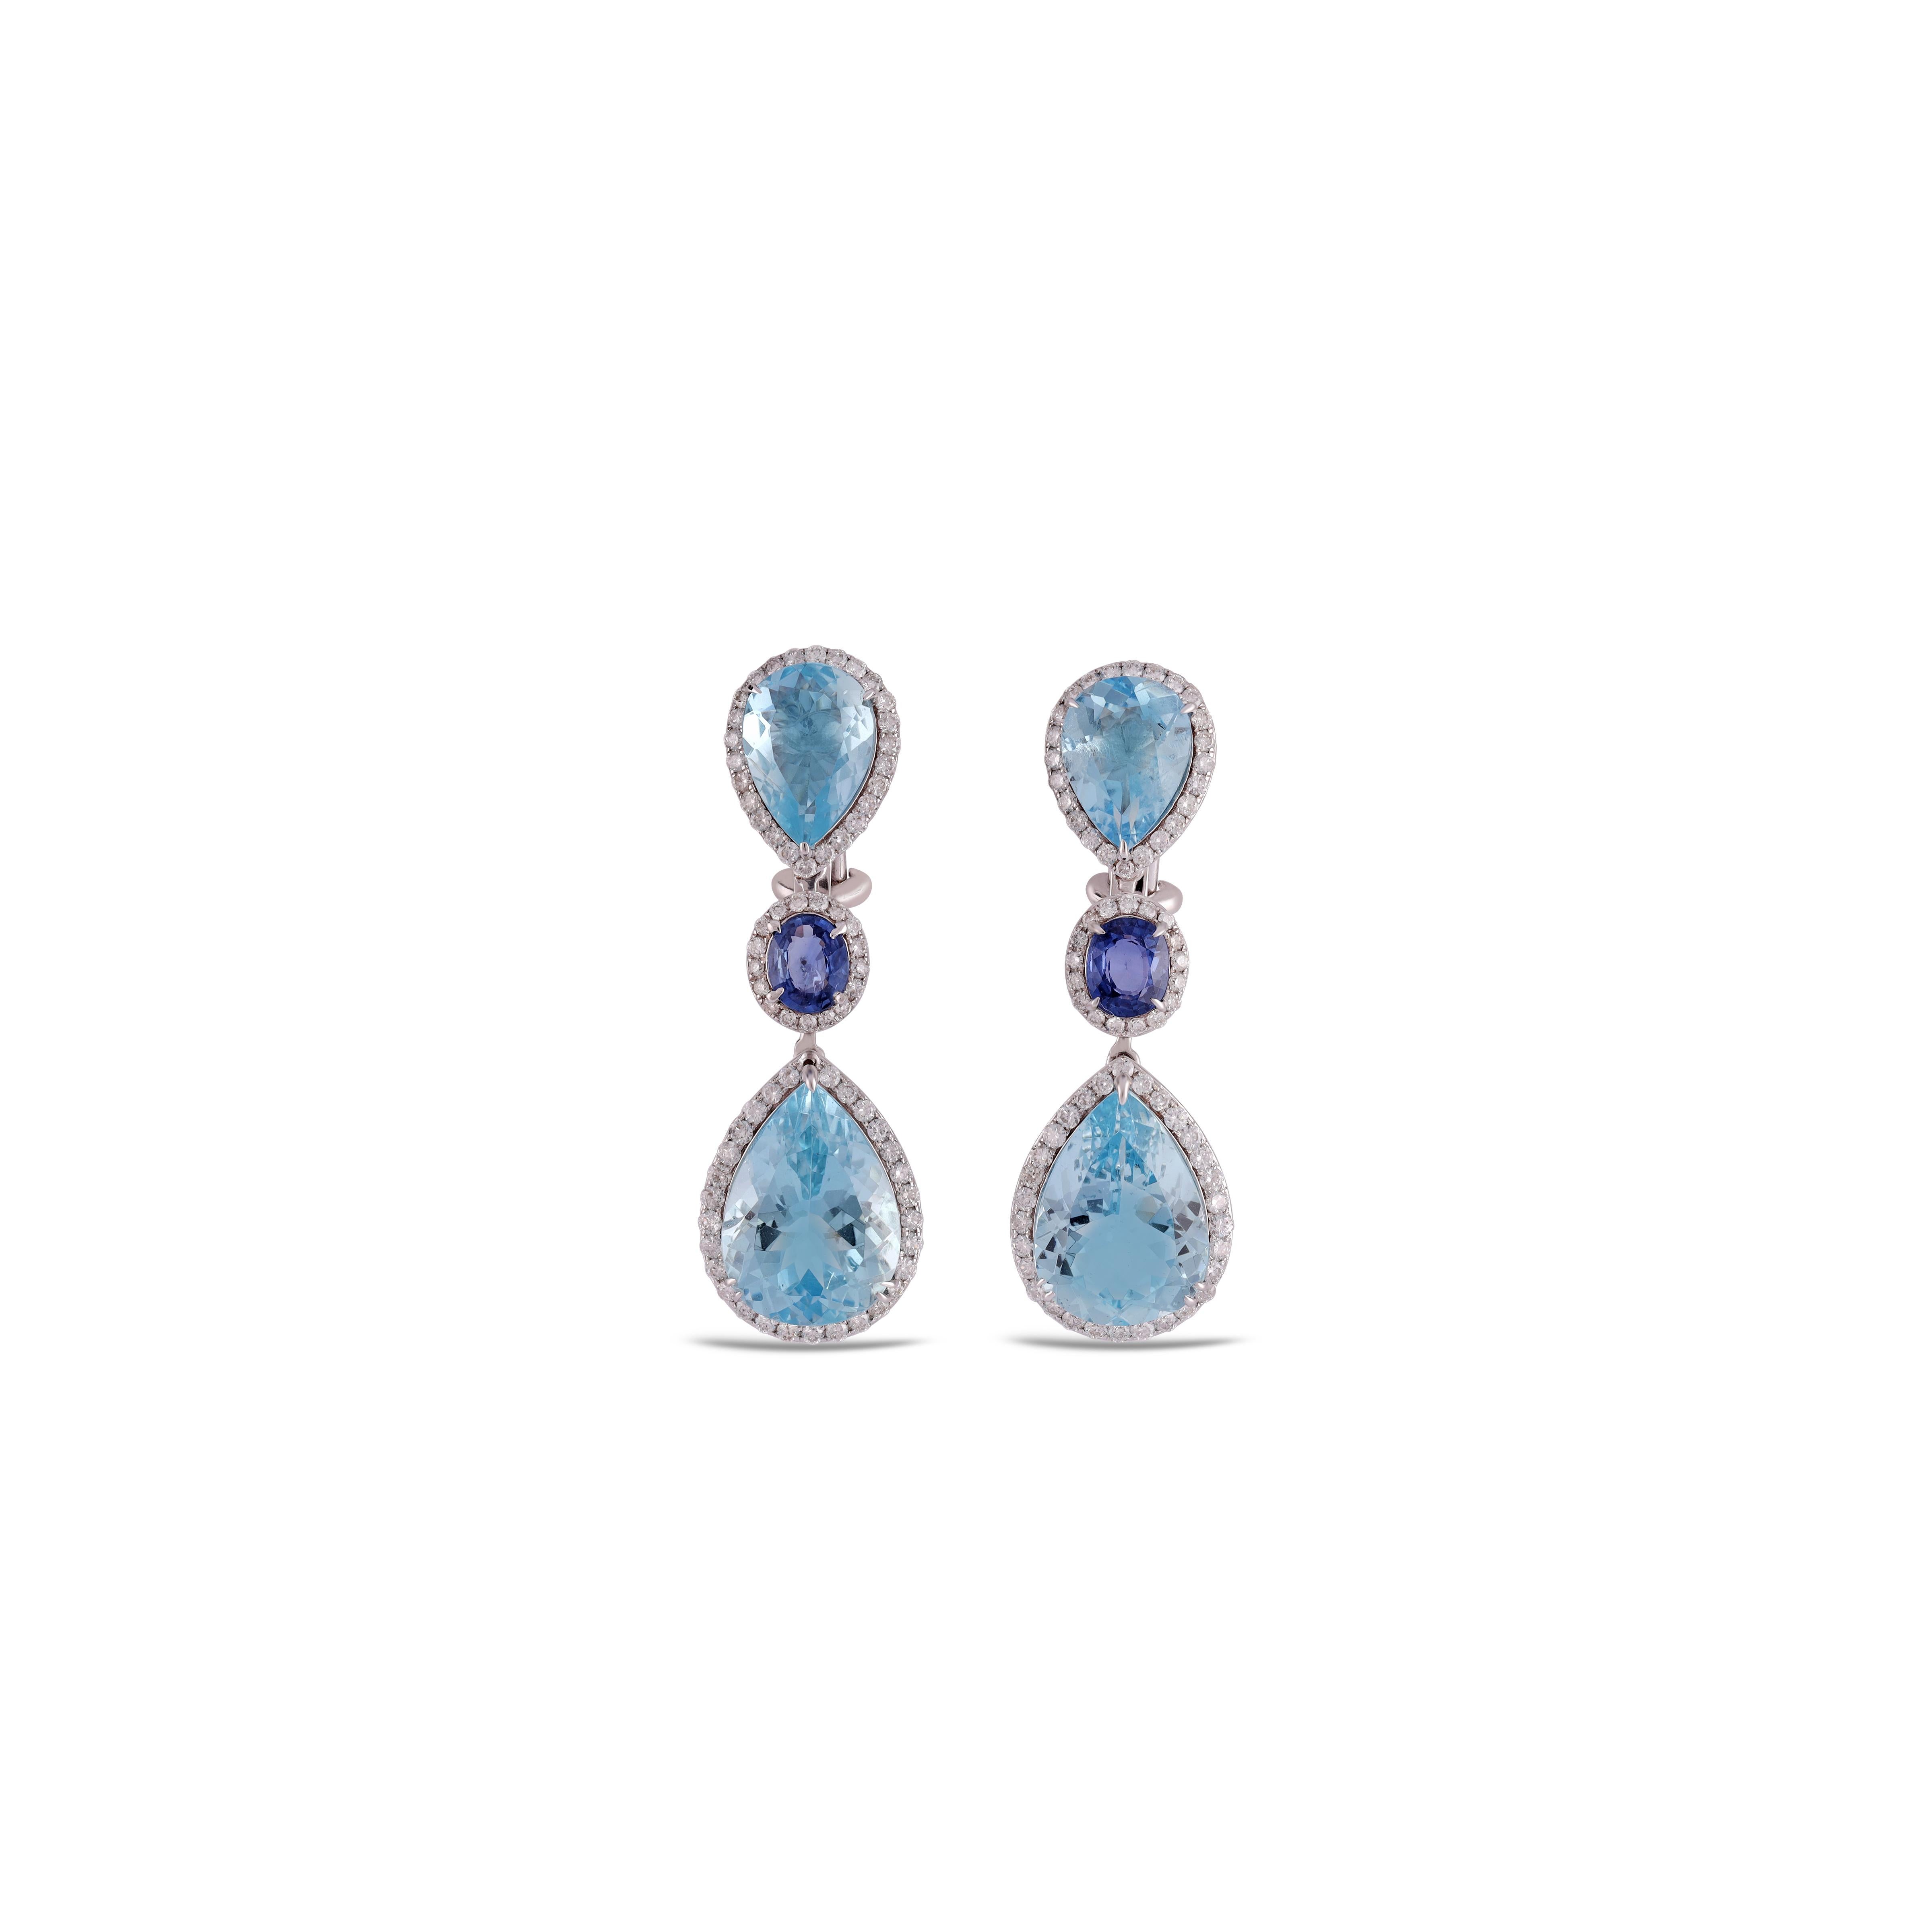 This is an elegant Aquamarine, Sapphire & diamond Earring studded in 18k gold with 4 piece of Pear 0r Drop Cut  shaped  Aquamarine weight 17.90 carat, Sapphire 1.61 Carat. which is surrounded by round shaped diamonds weight 1.40 carat, this entire